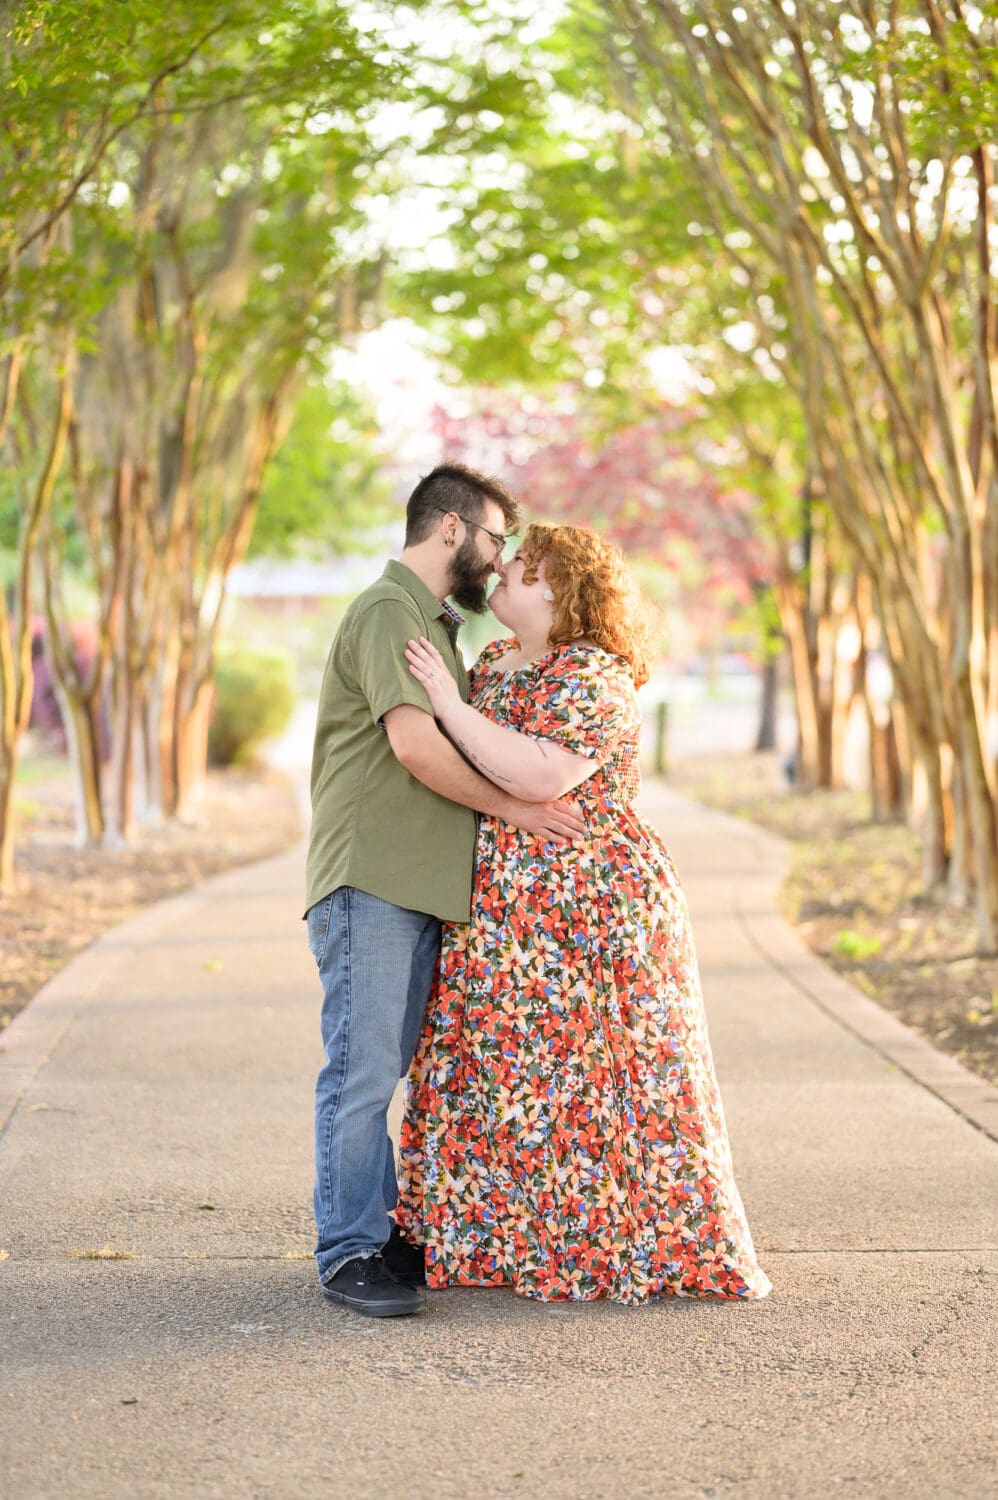 Kiss under the trees - Conway Riverwalk